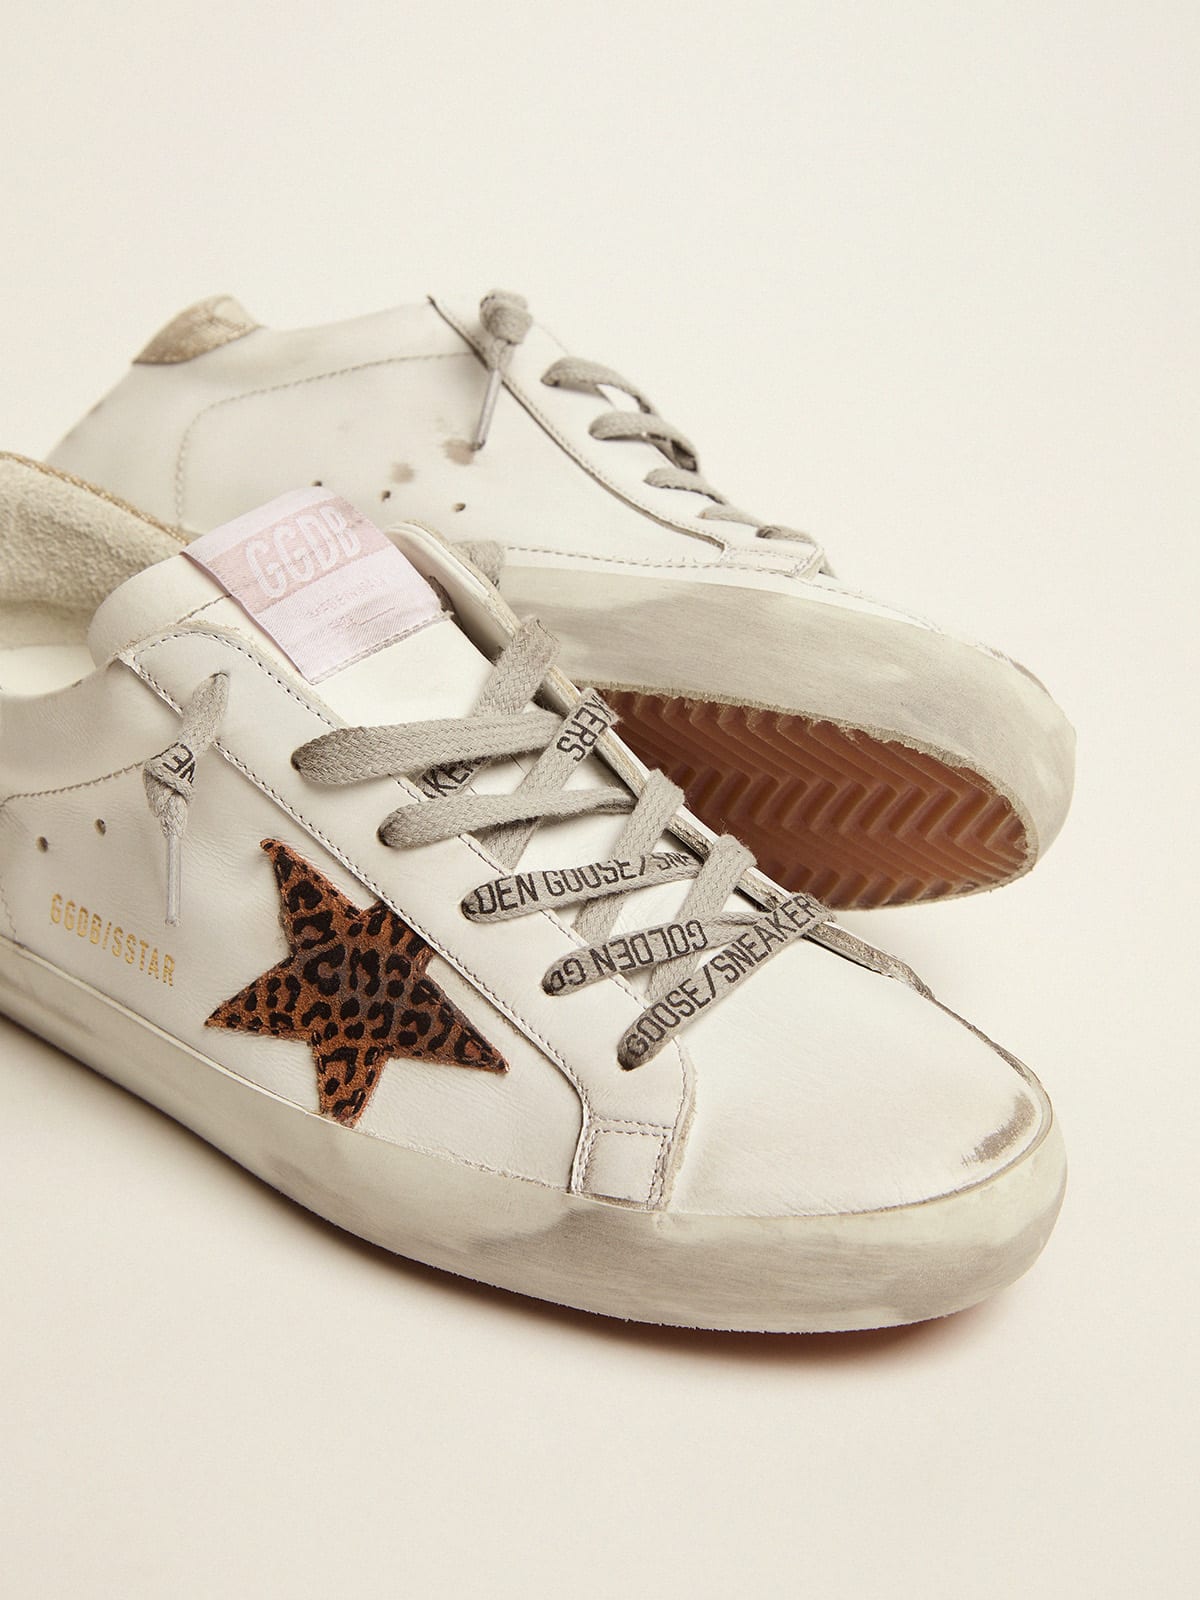 Super-Star LTD sneakers with leopard-print star and gold glitter heel tab |  Golden Goose